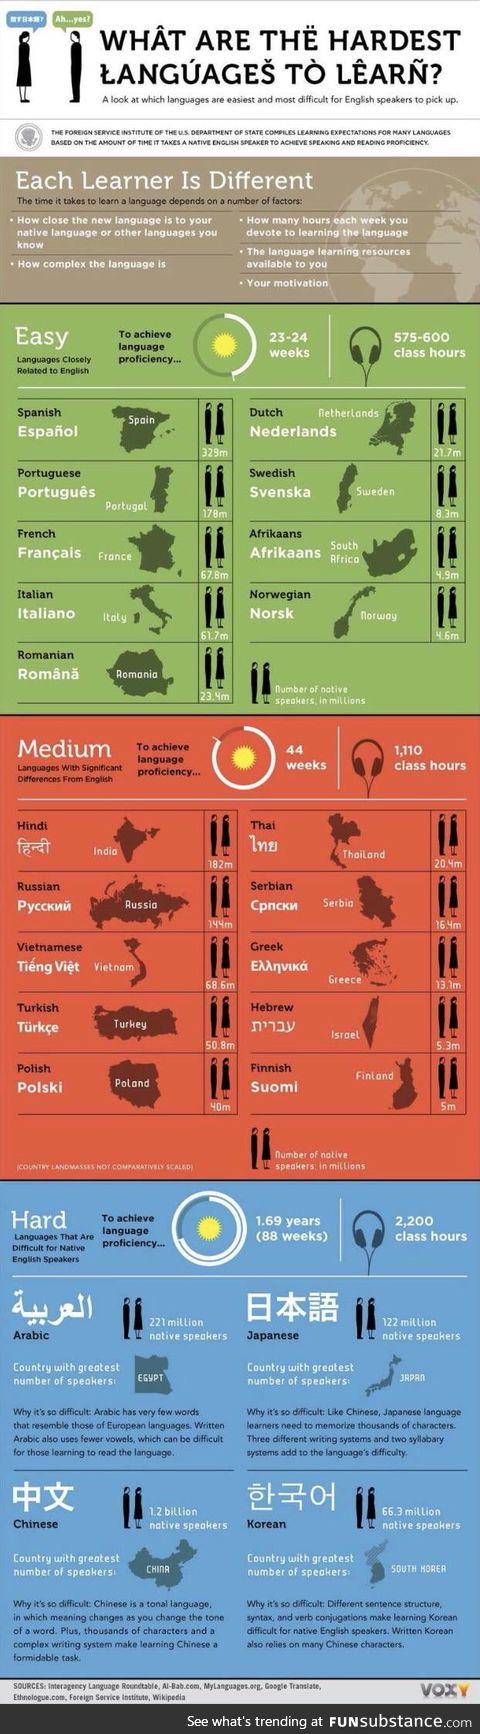 The easiest and most difficult languages to learn for an English speaker